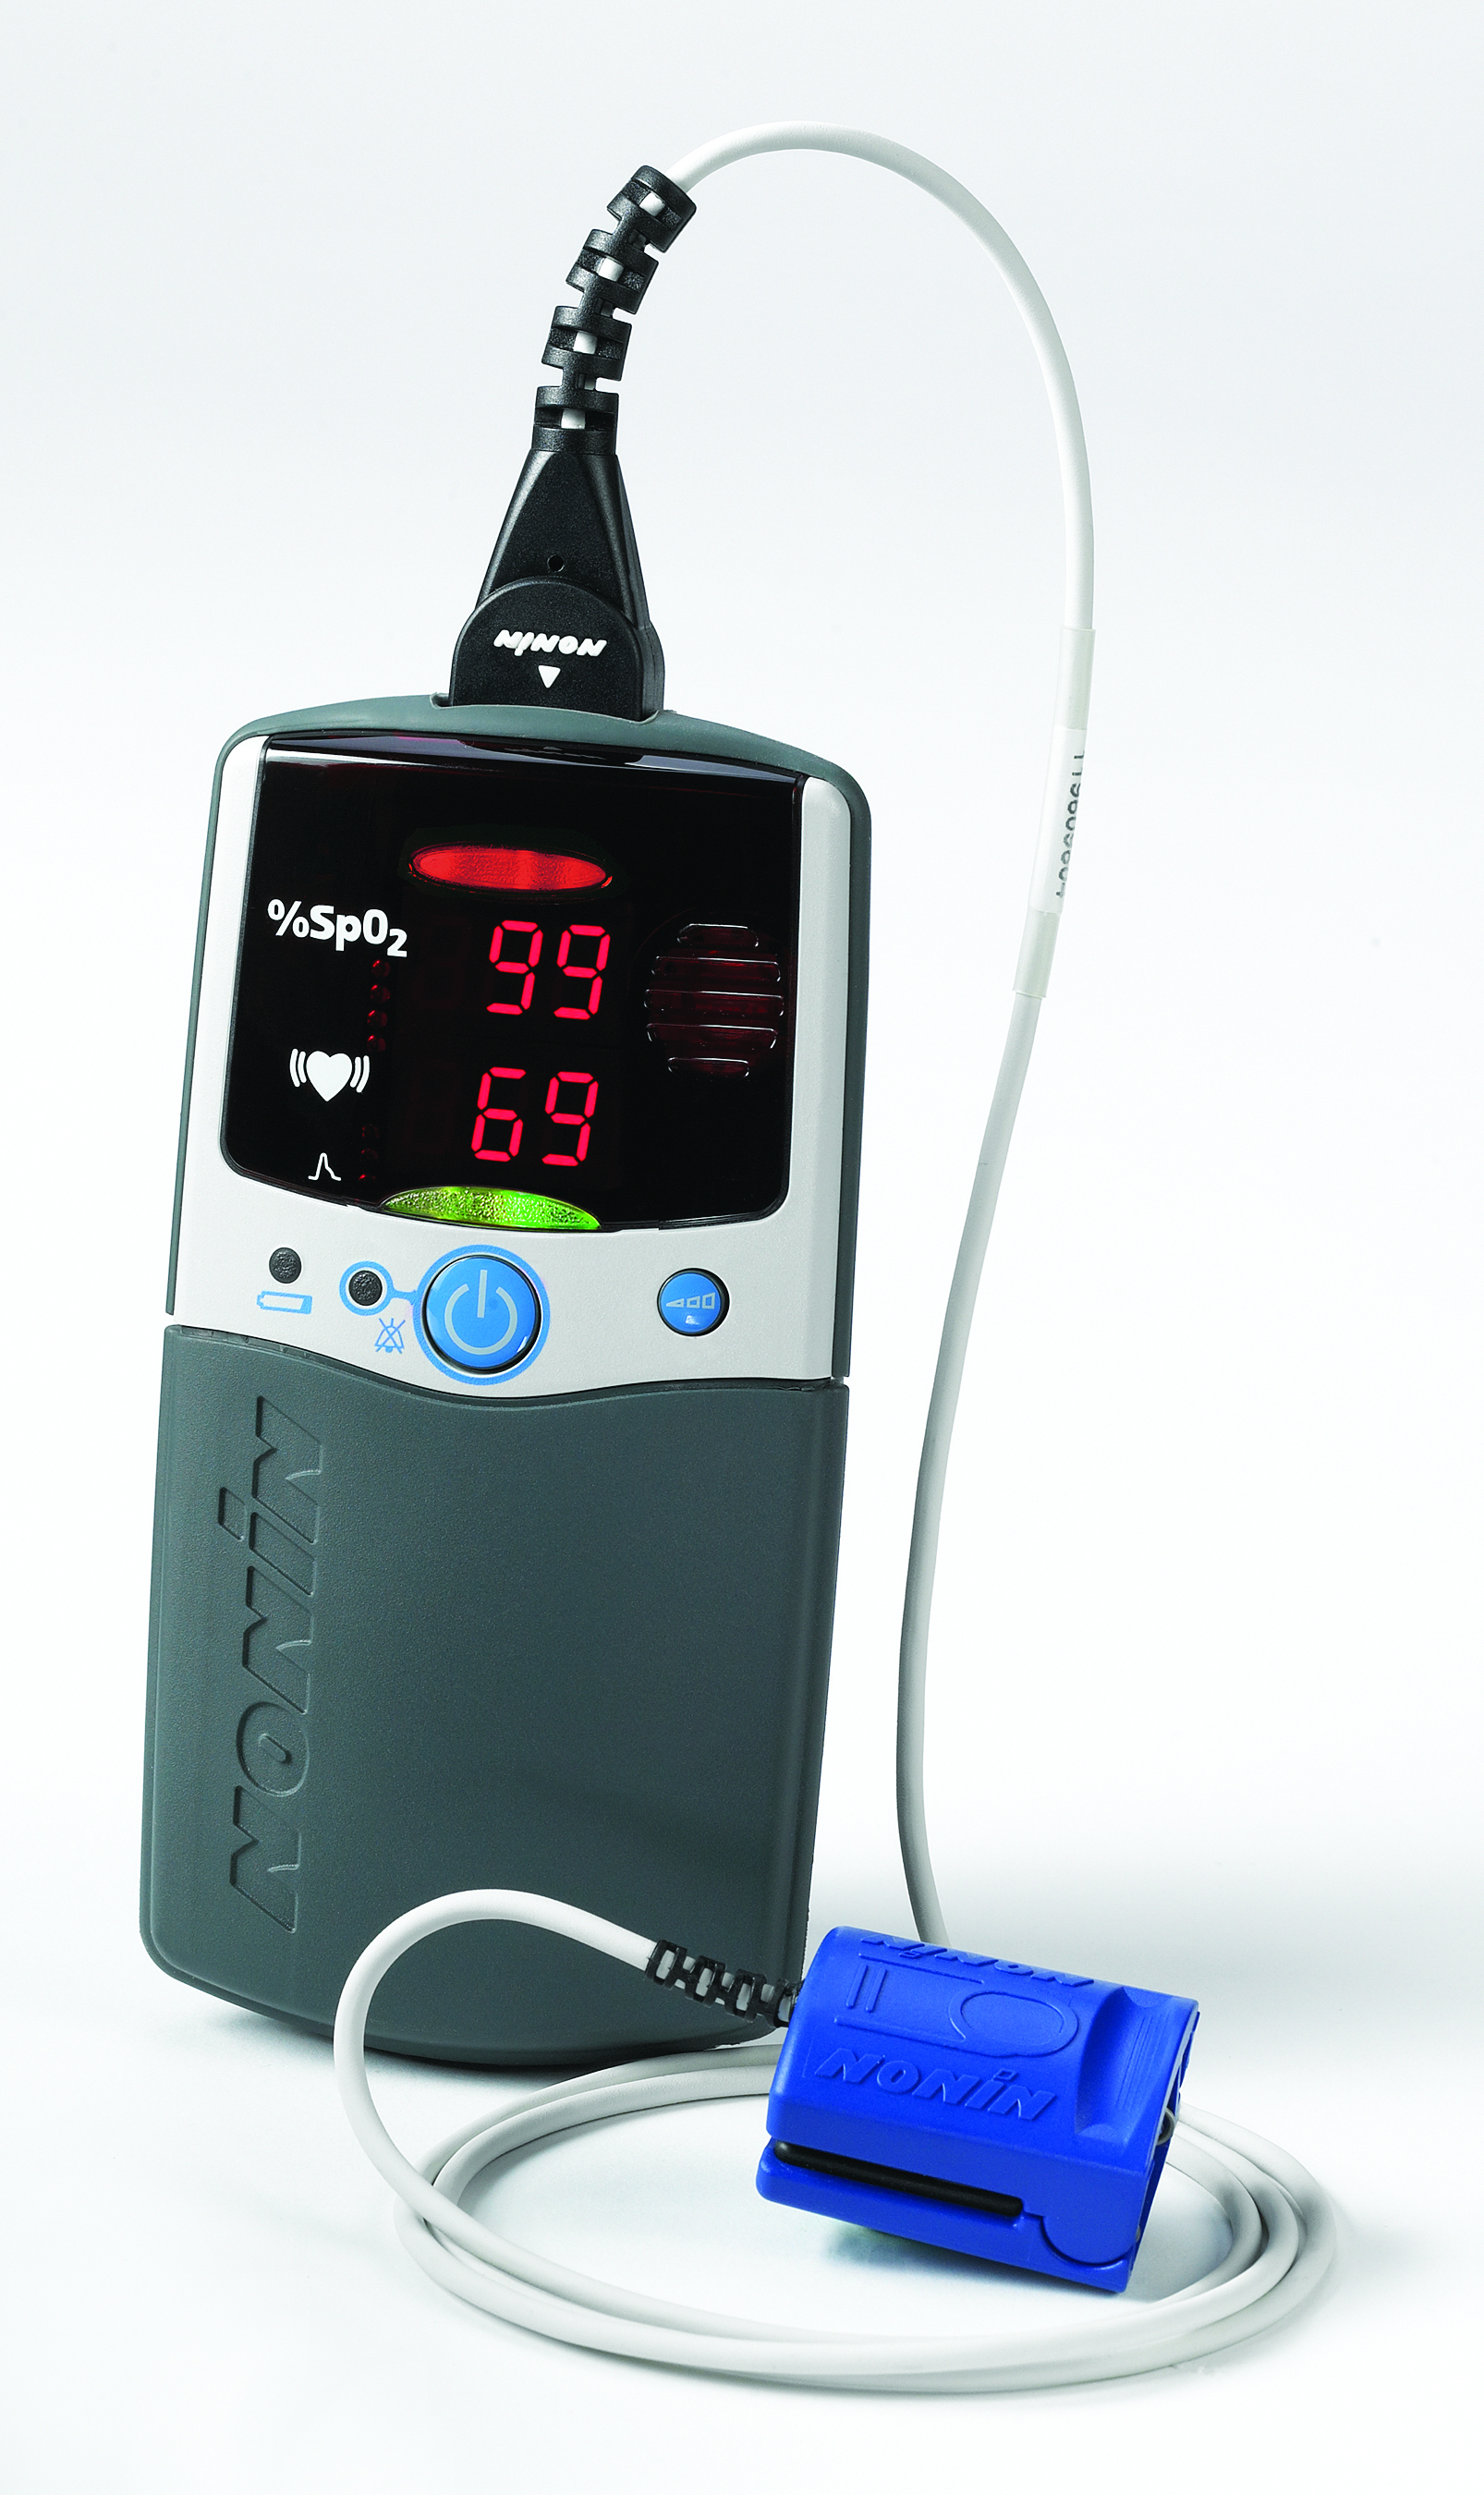 The U.S. Veteran's Administration chose Nonin Medical's PalmSAT(R) 2500A Handheld Pulse Oximeter for use in its V.A. Hospitals. Nonin's American-made PalmSAT Model 2500A uses proprietary PureSAT pulse-by-pulse filtering to provide precise SpO2 measurements -- even in the presence of poor perfusion, patient movement, dark skin tone, and other conditions that can affect accurate pulse oximetry readings. The device can provide clinicians an early warning of hypoxemia.  (PRNewsFoto/Nonin Medical, Inc.)